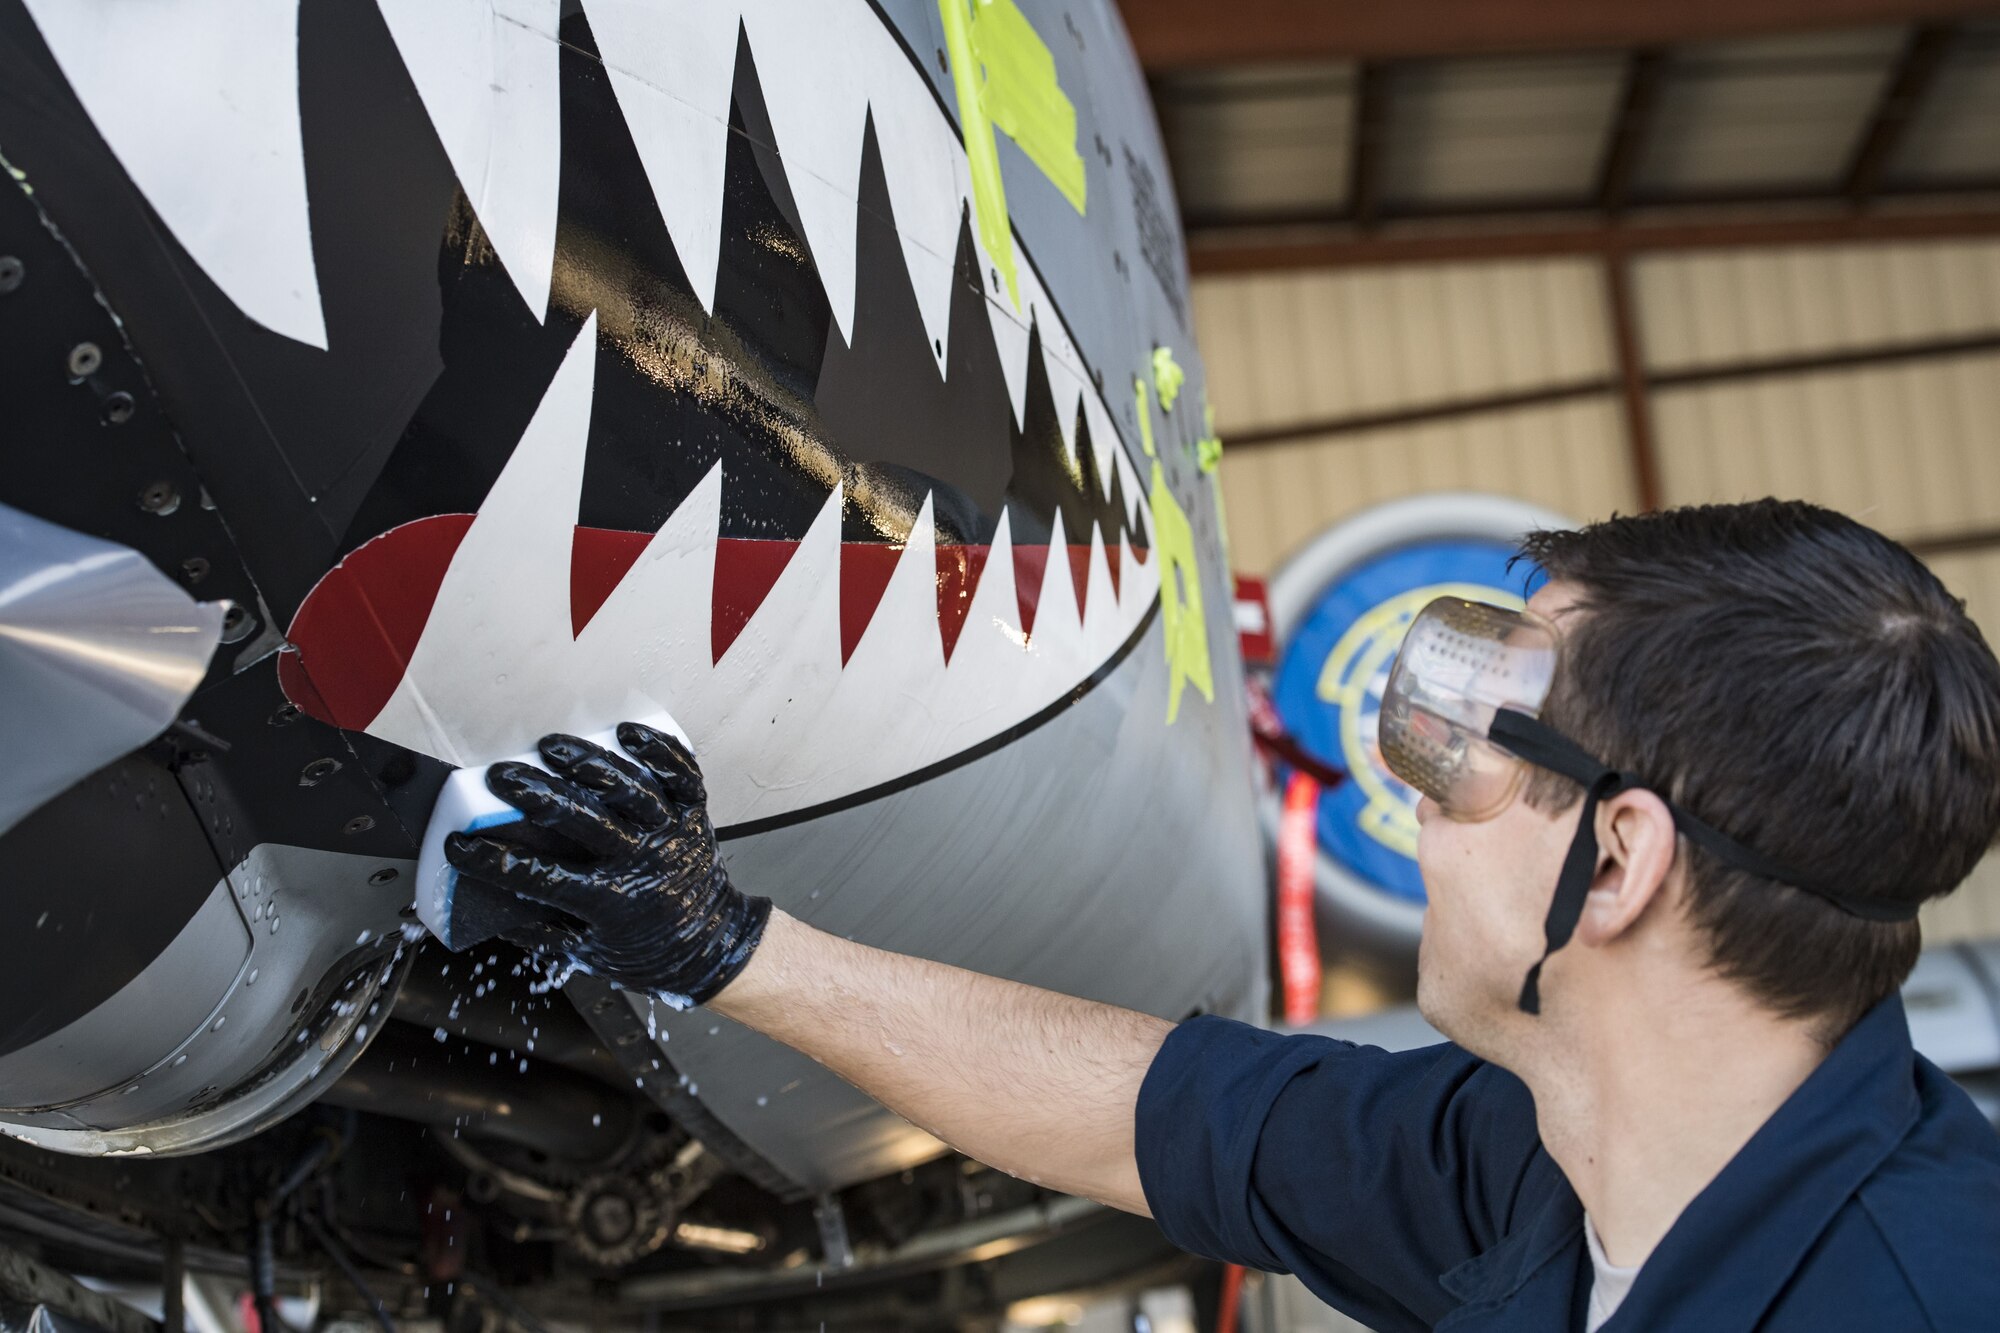 Senior Airman Michael Atkinson, 74th Aircraft Maintenance Unit dedicated crew chief, washes the teeth on an A-10C Thunderbolt II, Feb. 8, 2018, at Moody Air Force Base, Ga.
In addition to mechanical and electrical maintenance, A-10’s must be washed every 180 days or approximately 1,000 flying hours in order to control corrosion caused by residue from the gun and engine exhaust. (U.S. Air Force photo by Senior Airman Janiqua P. Robinson)